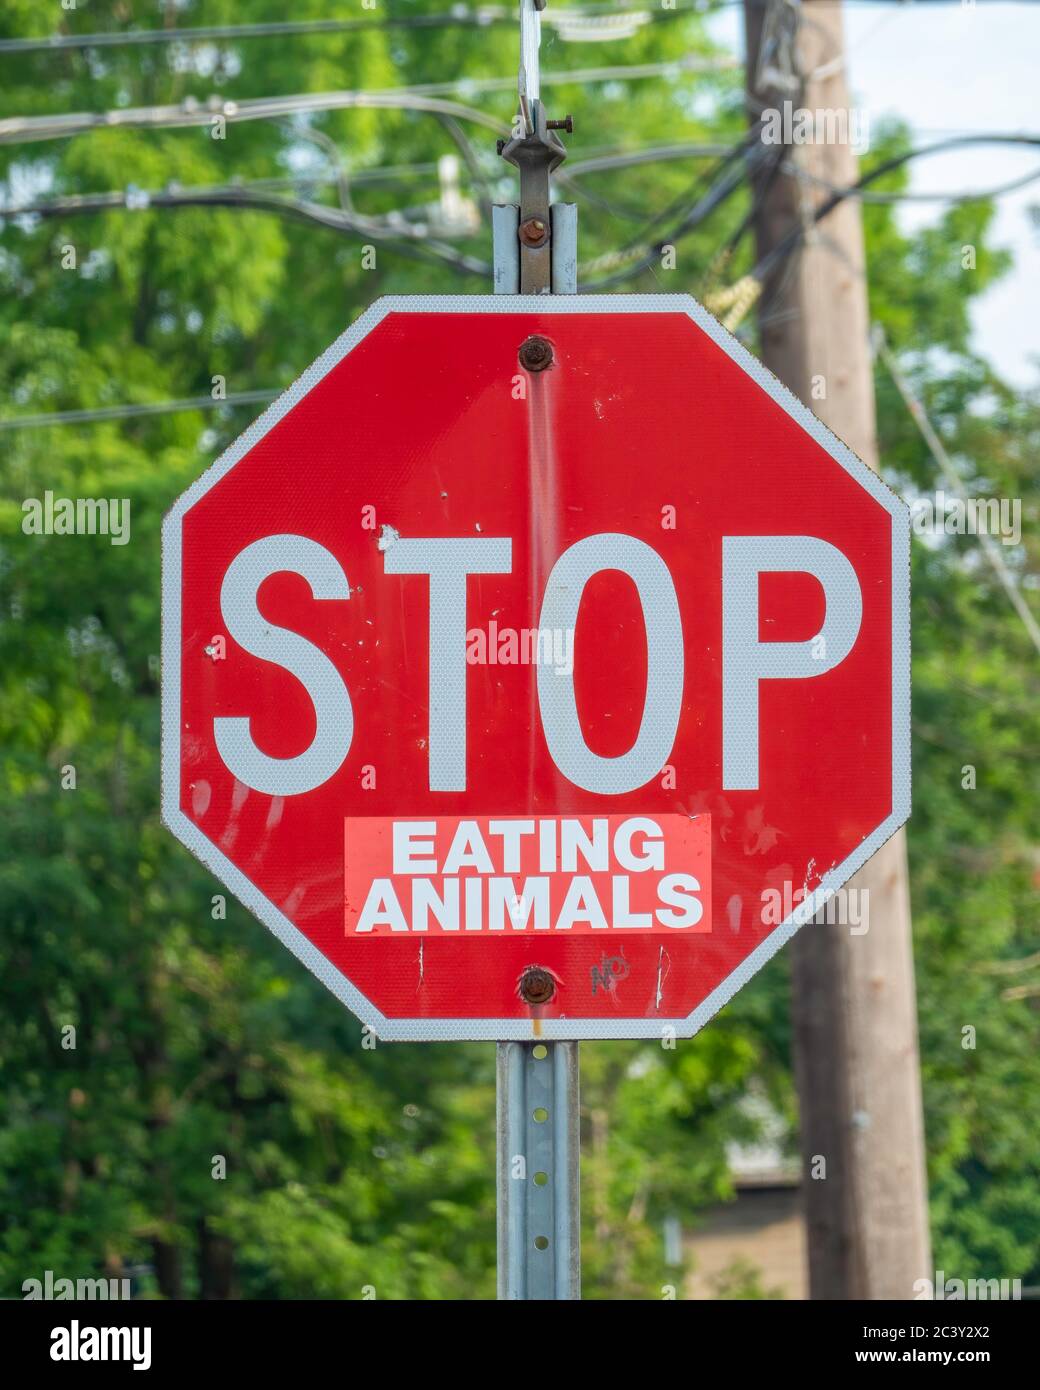 Animal rights activists have defaced a stop sign to get their stop eating animals message across to many people. Stock Photo